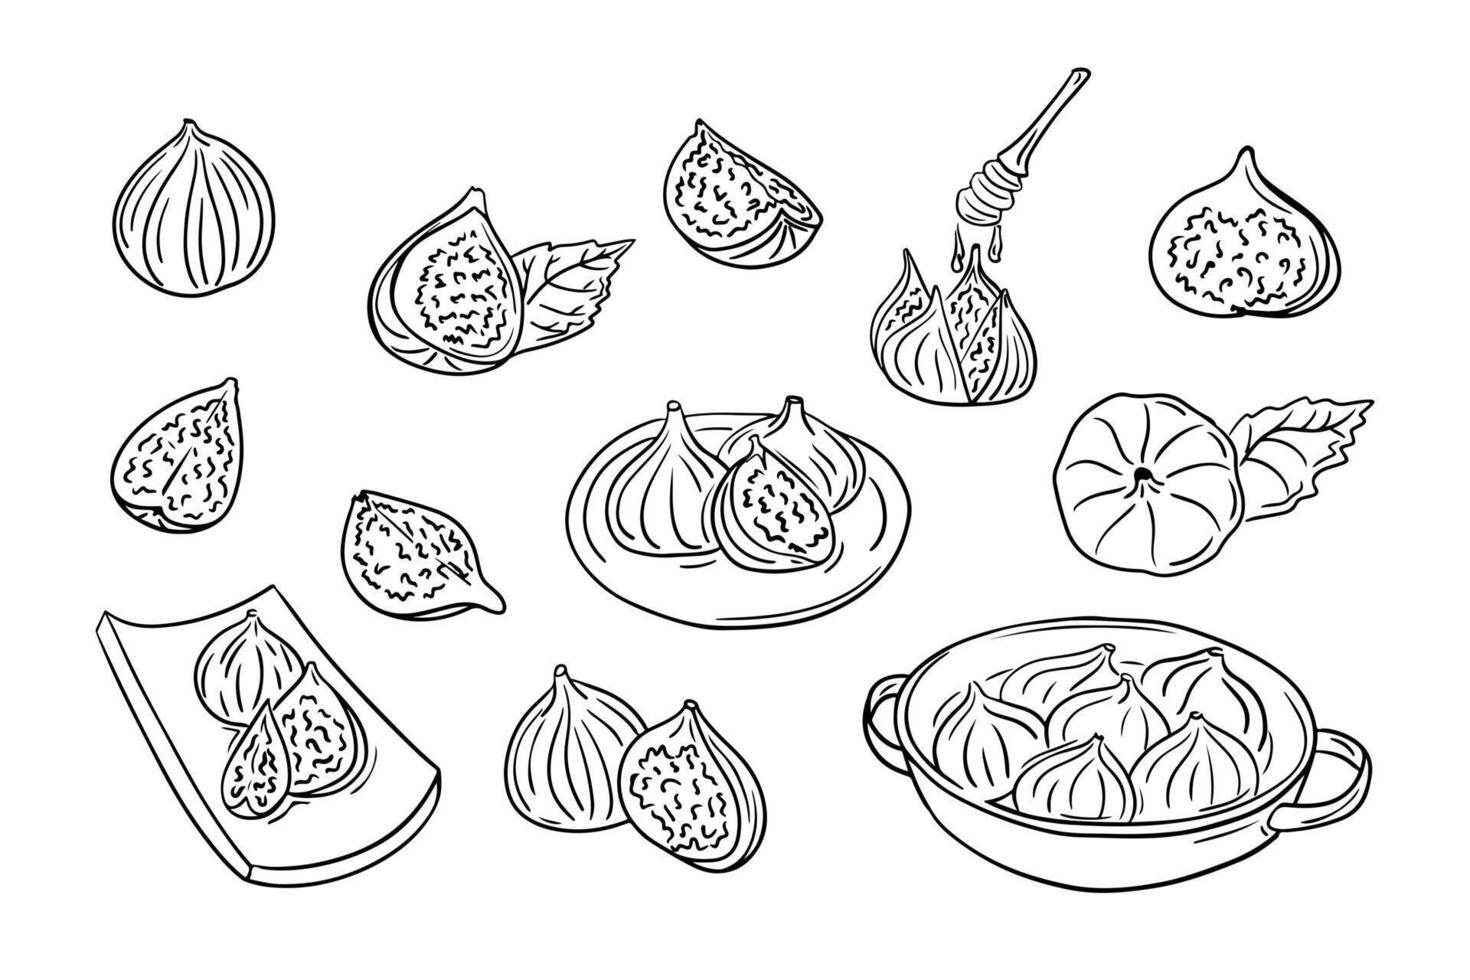 Set of sketch contour drawings of figs. Vector contour drawings of fruits for healthy eating on white background. Ideal for coloring pages, tattoo, stickers